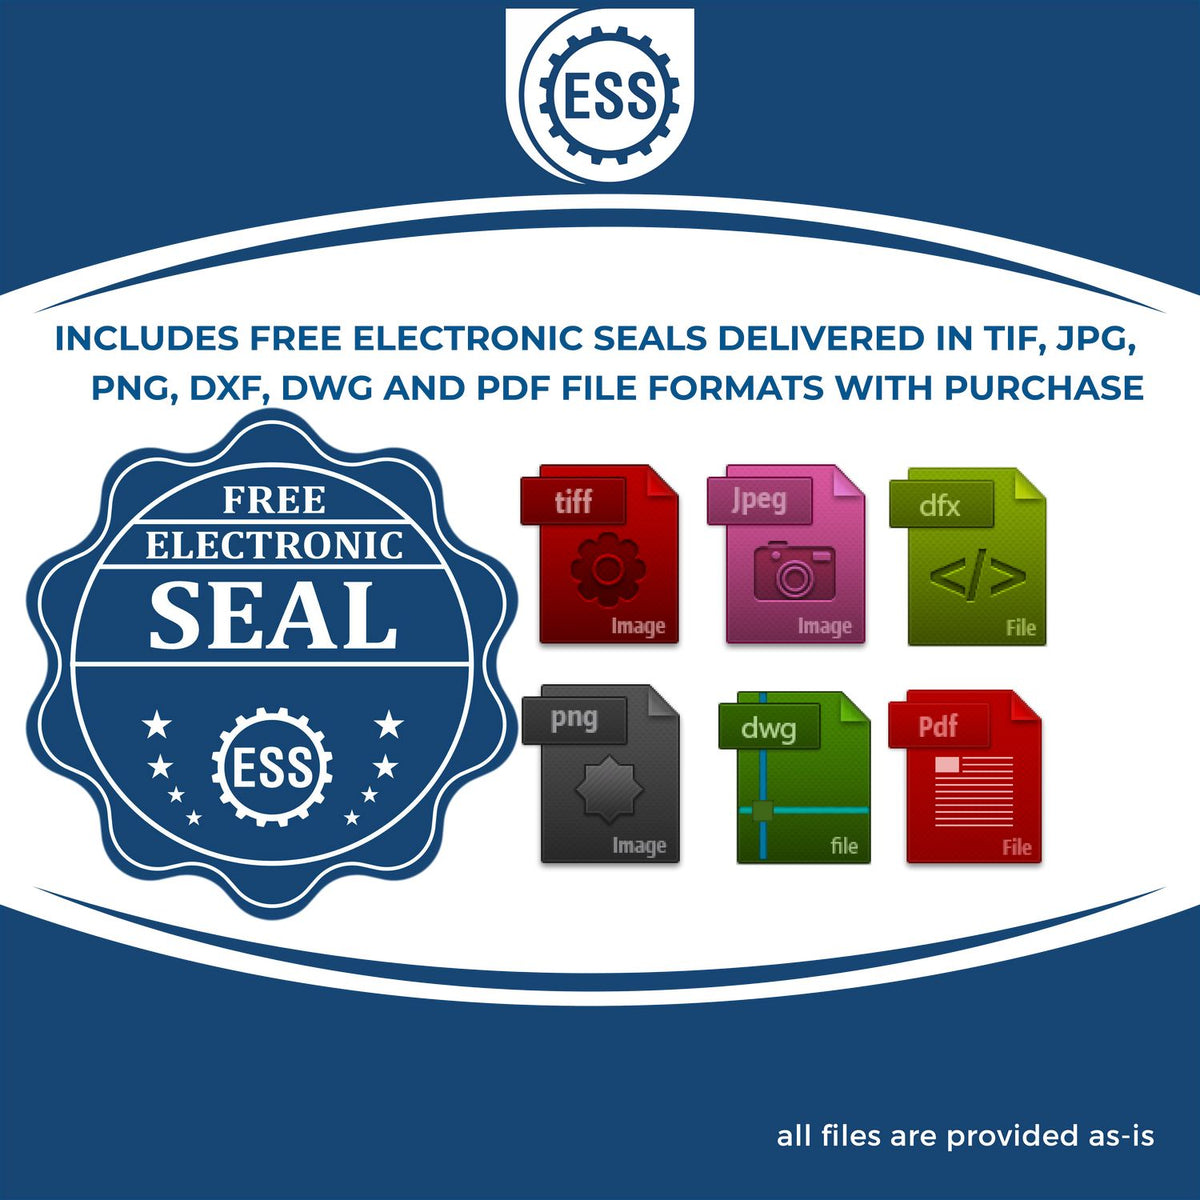 An infographic for the free electronic seal for the Hybrid Georgia Engineer Seal illustrating the different file type icons such as DXF, DWG, TIF, JPG and PNG.